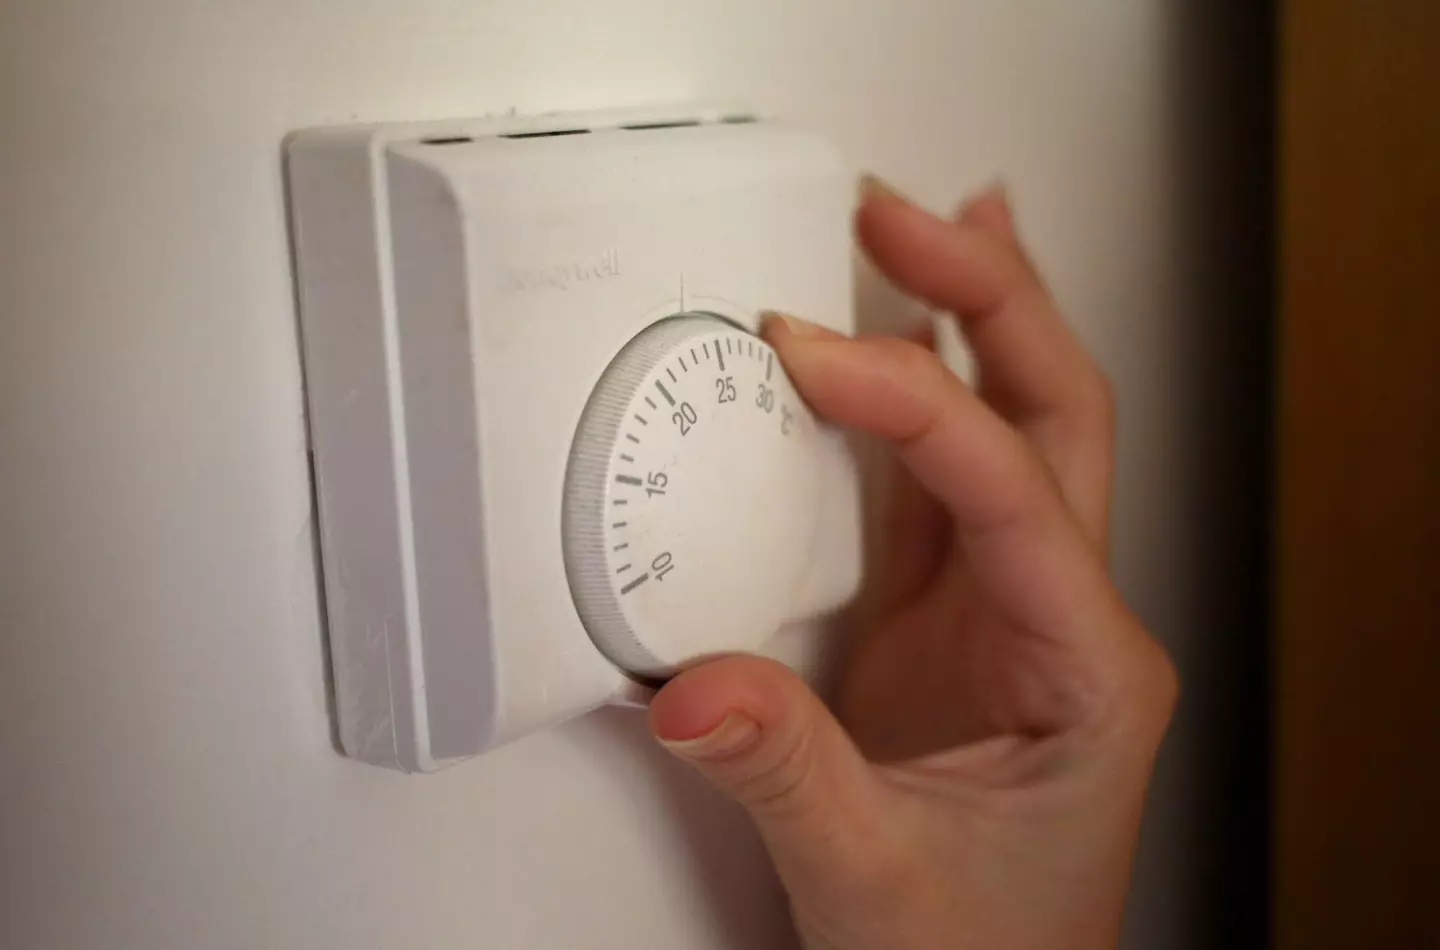 Energy bills are set to increase again this year.